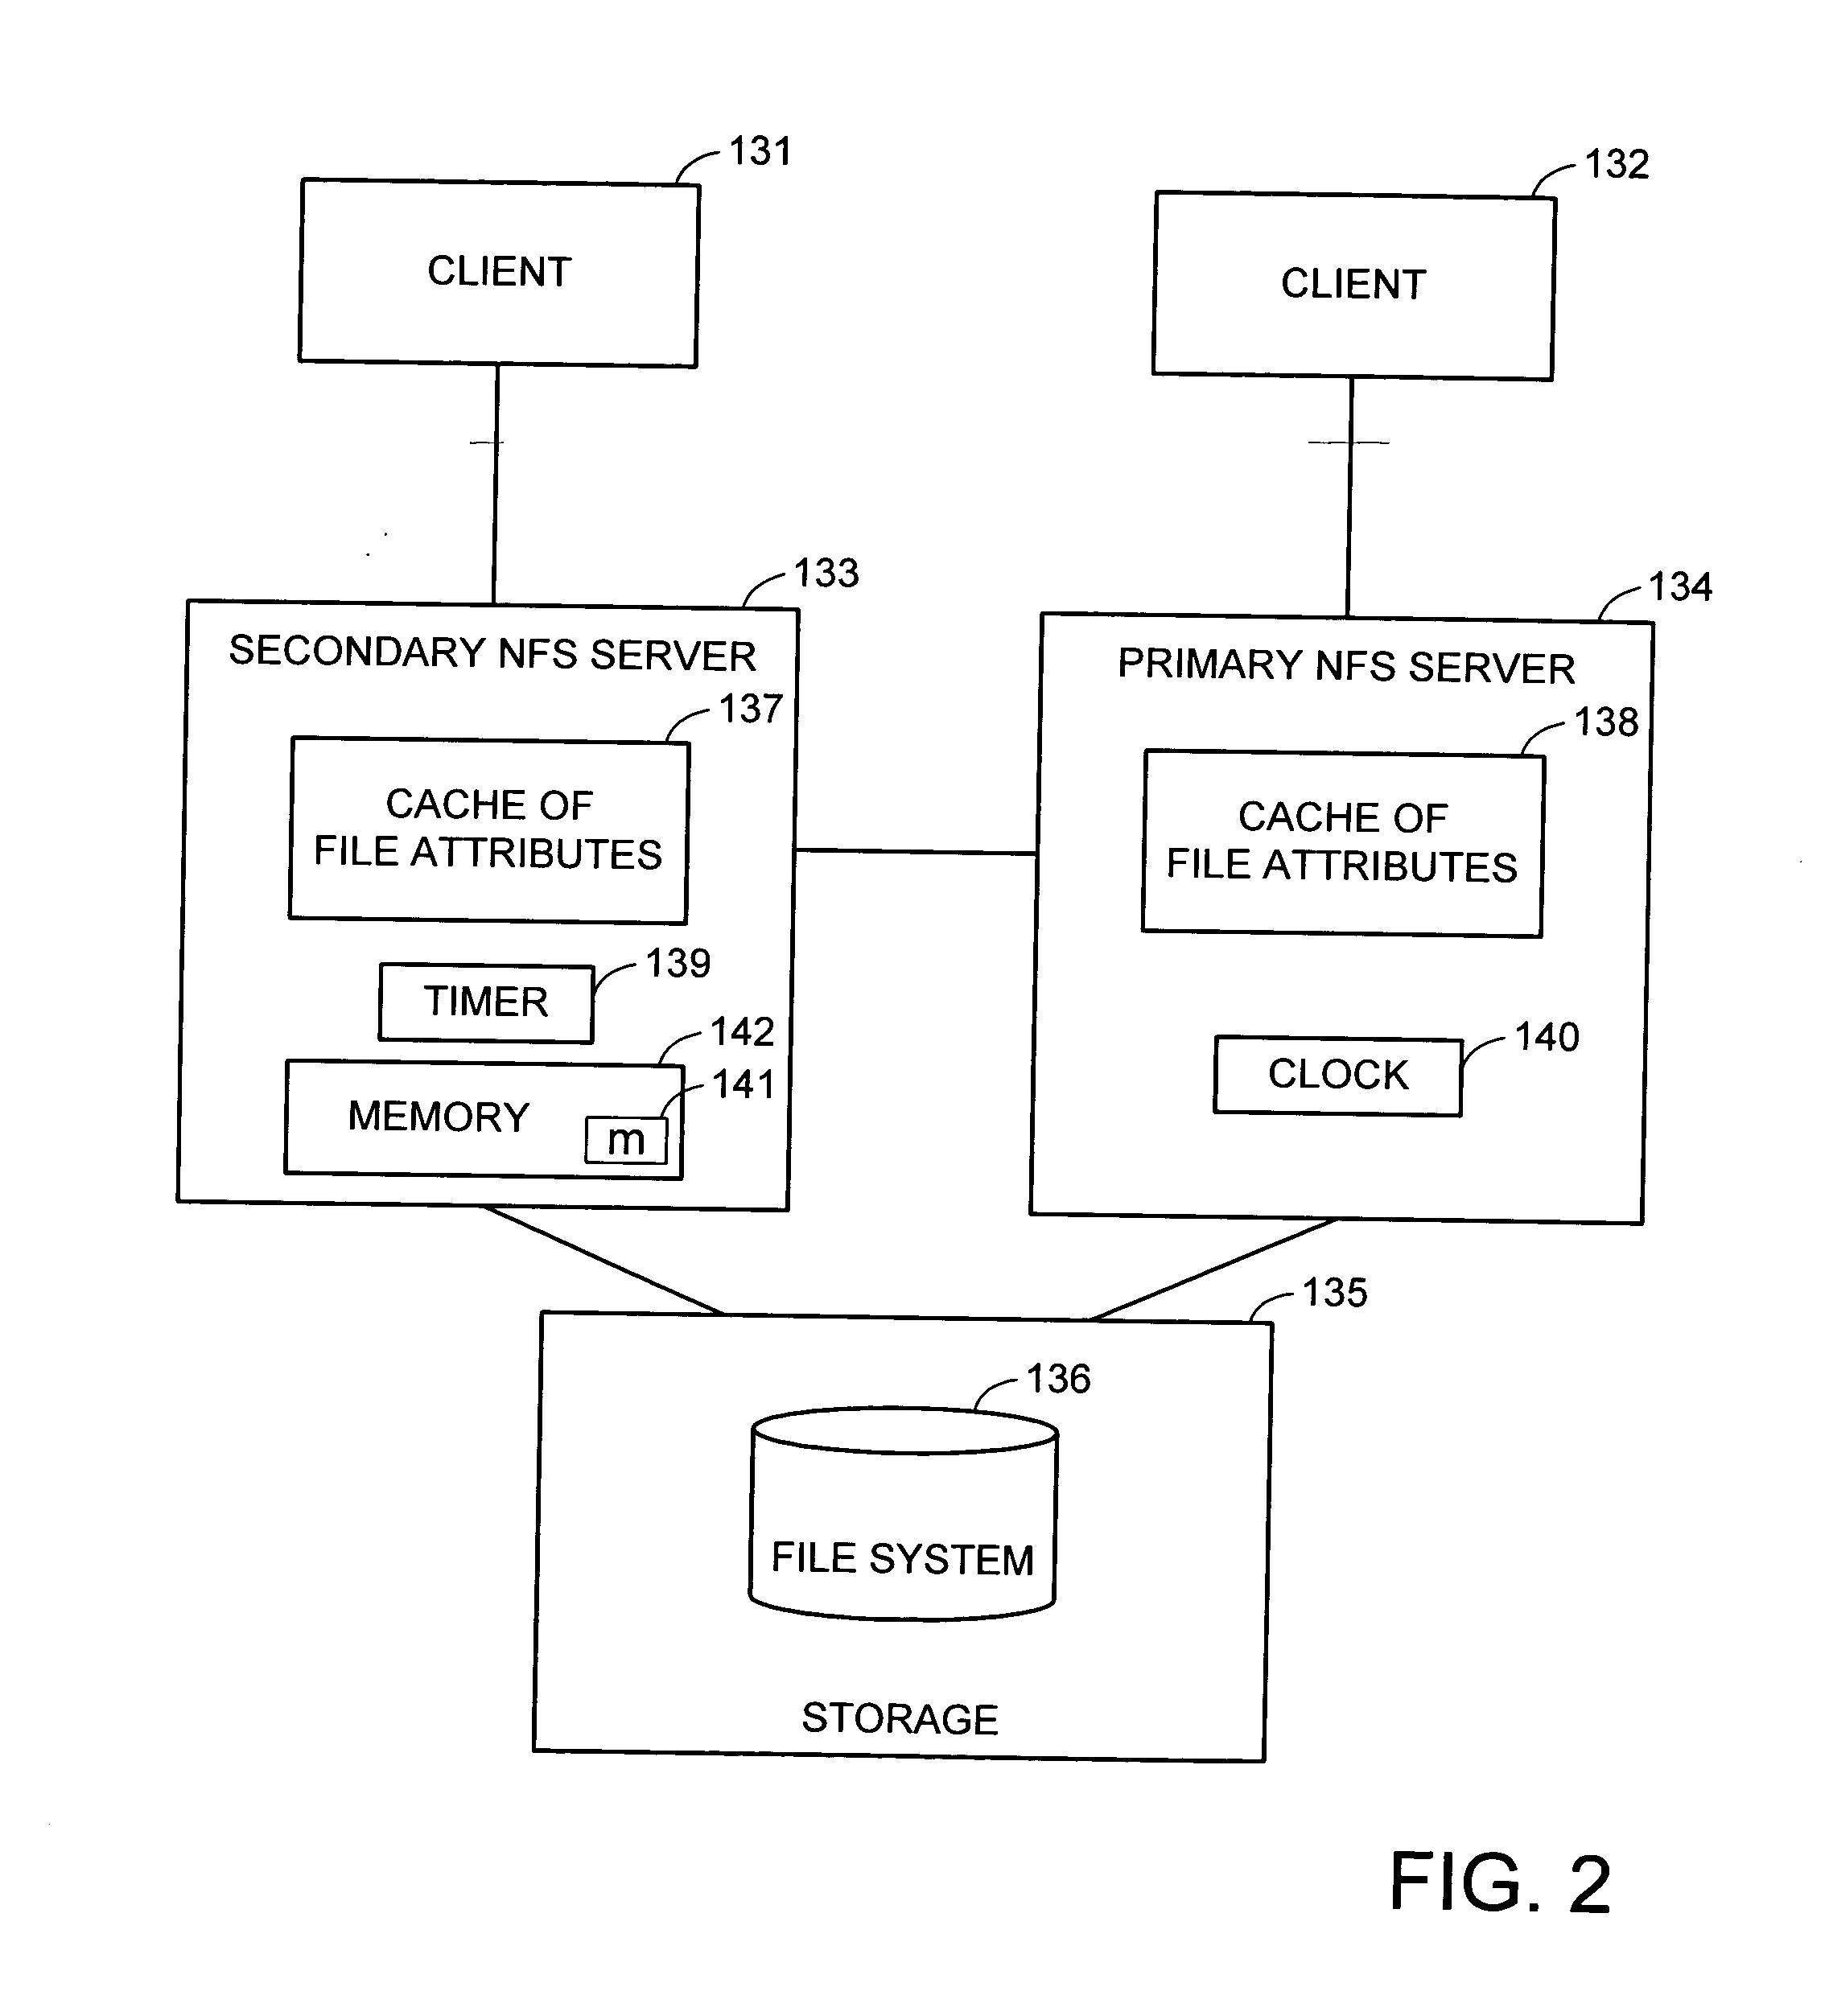 Management of the file-modification time attribute in a multi-processor file server system